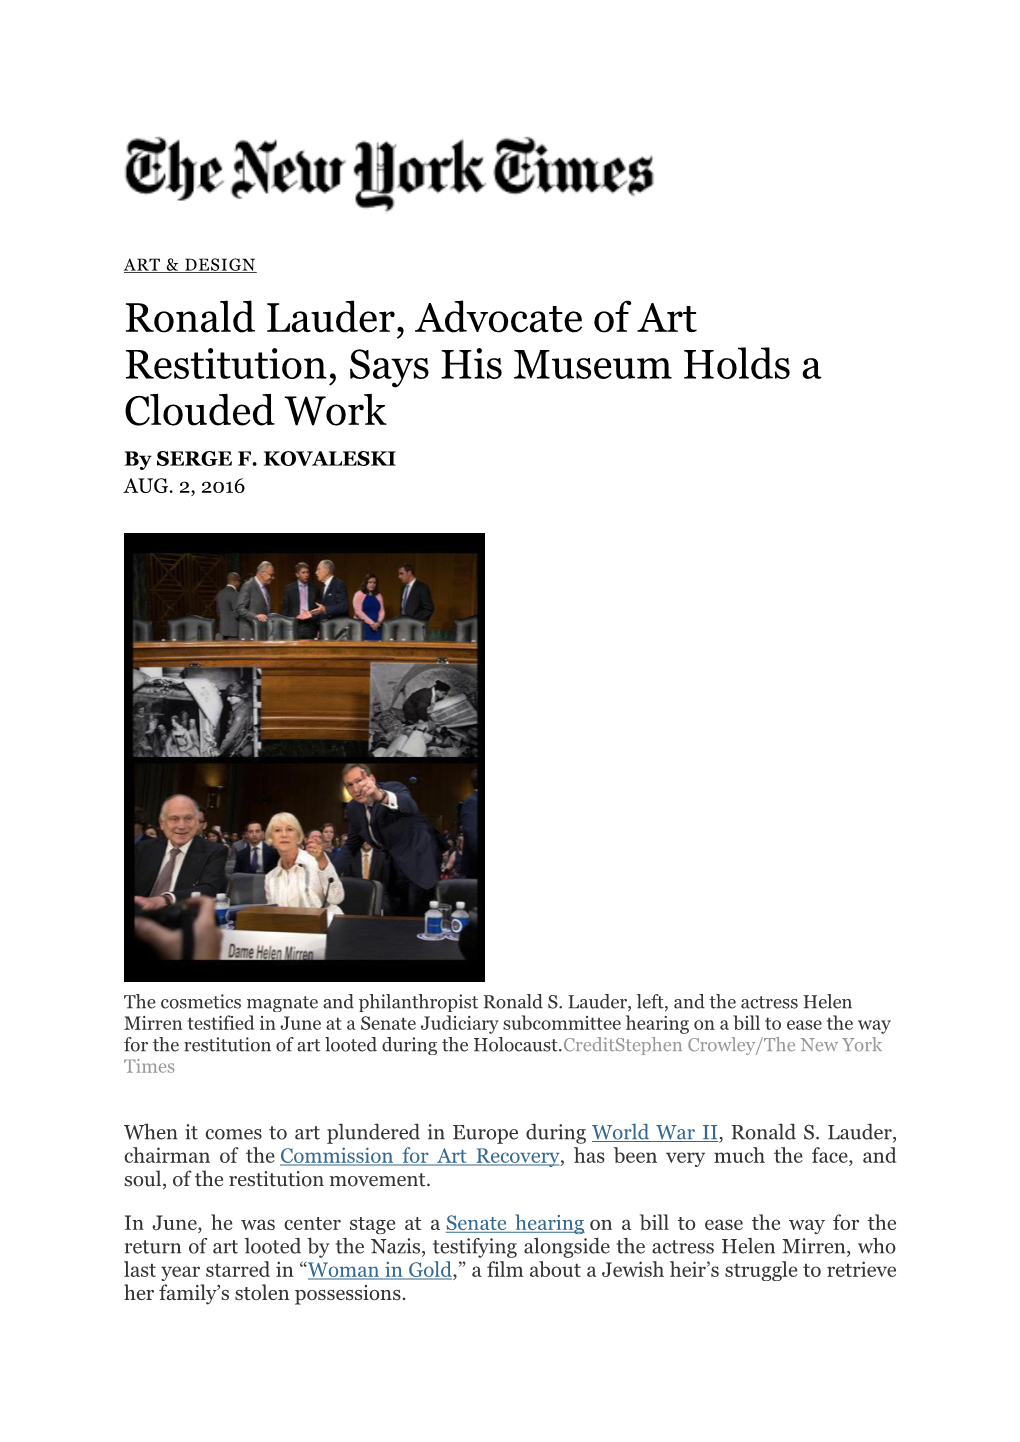 Ronald Lauder, Advocate of Art Restitution, Says His Museum Holds a Clouded Work by SERGE F